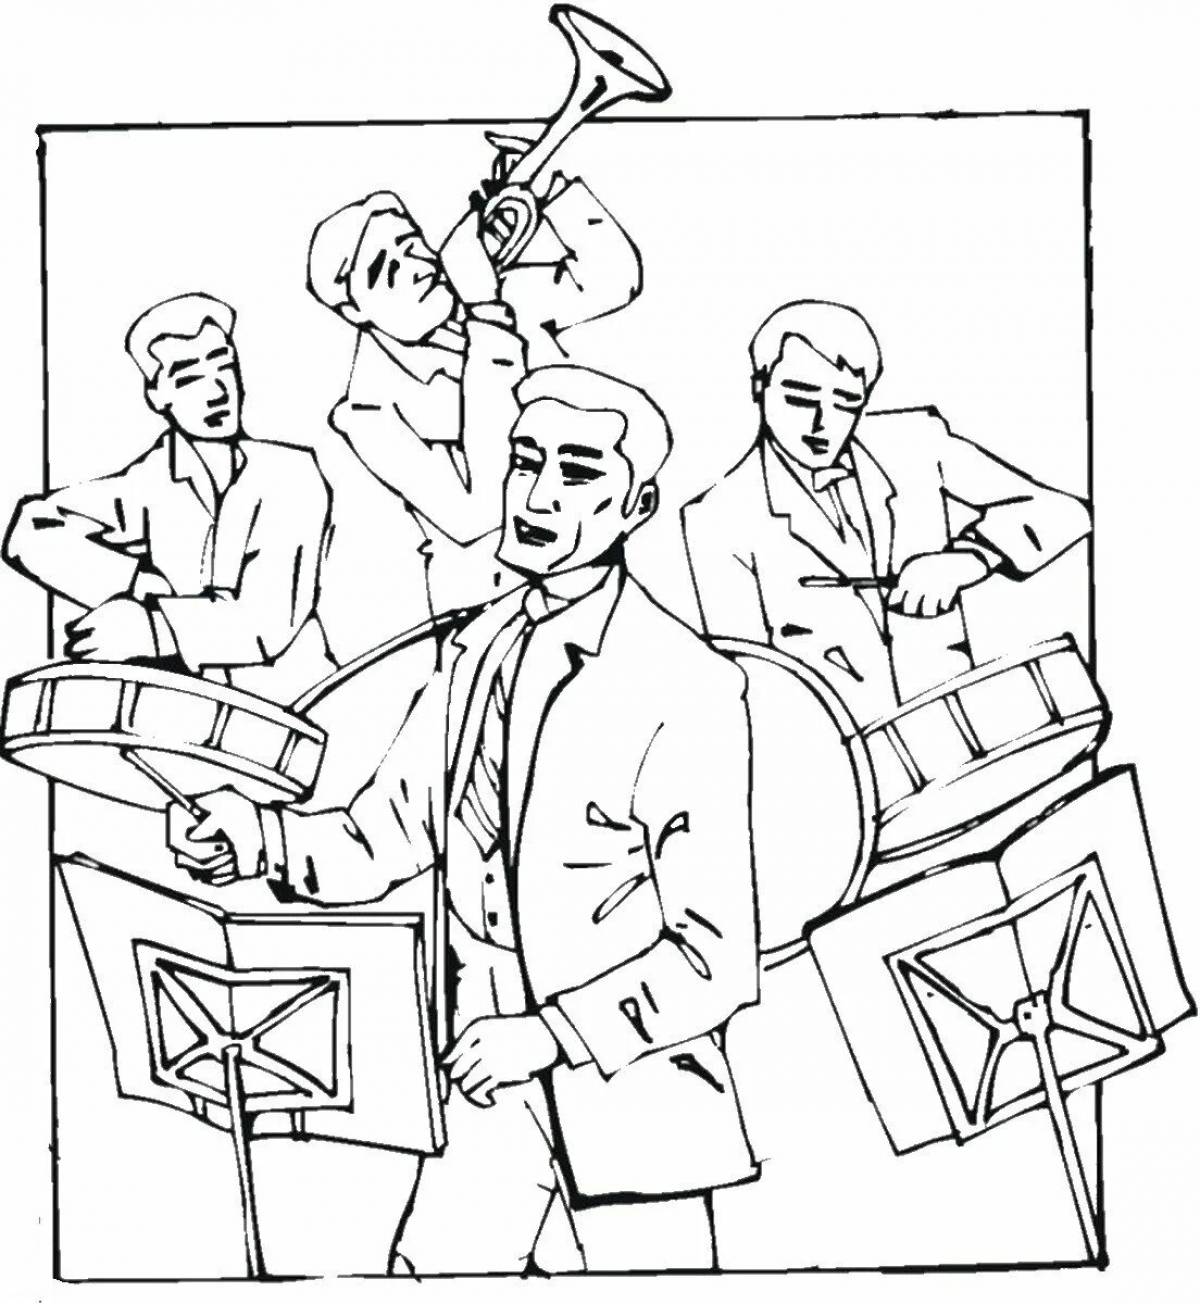 Coloring page festive orchestra for children